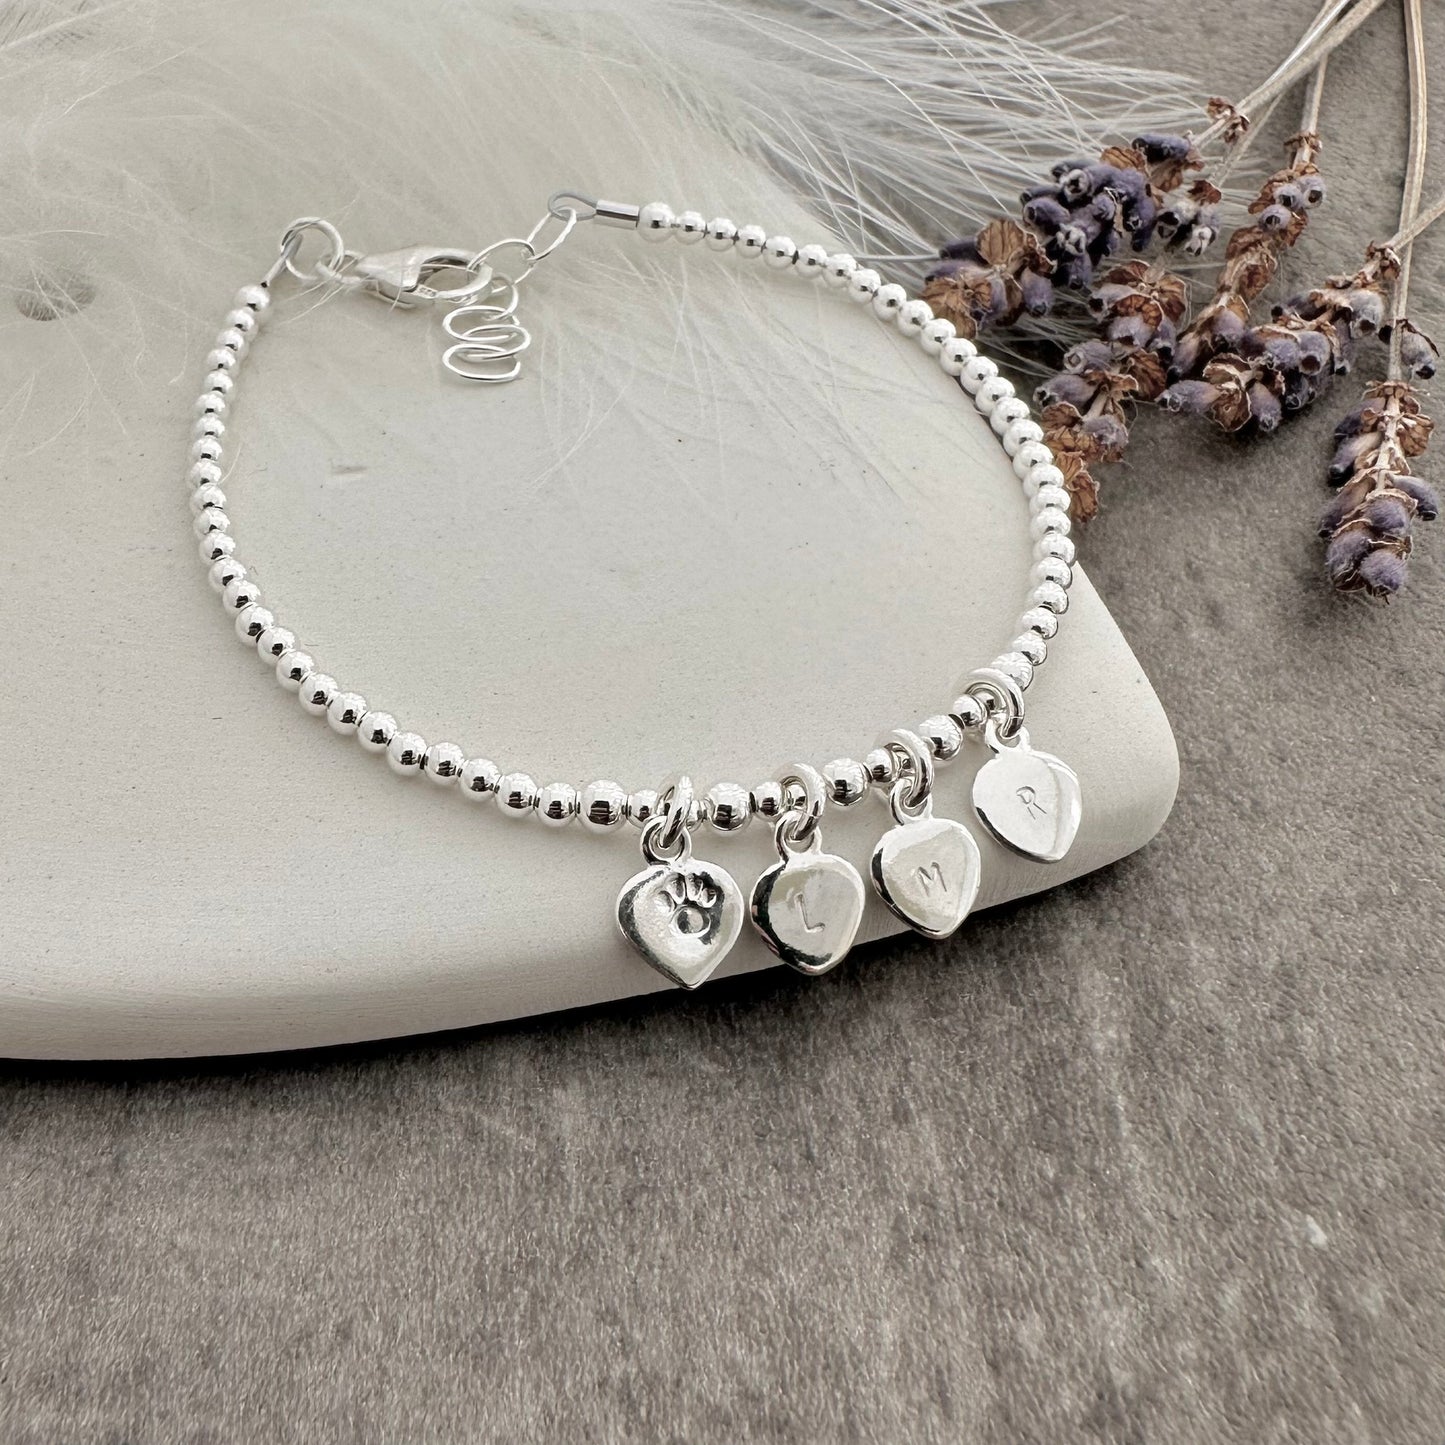 Paw and Pet Initials Personalised Bracelet sterling silver, Cat Dog lovers gift Dainty Jewellery